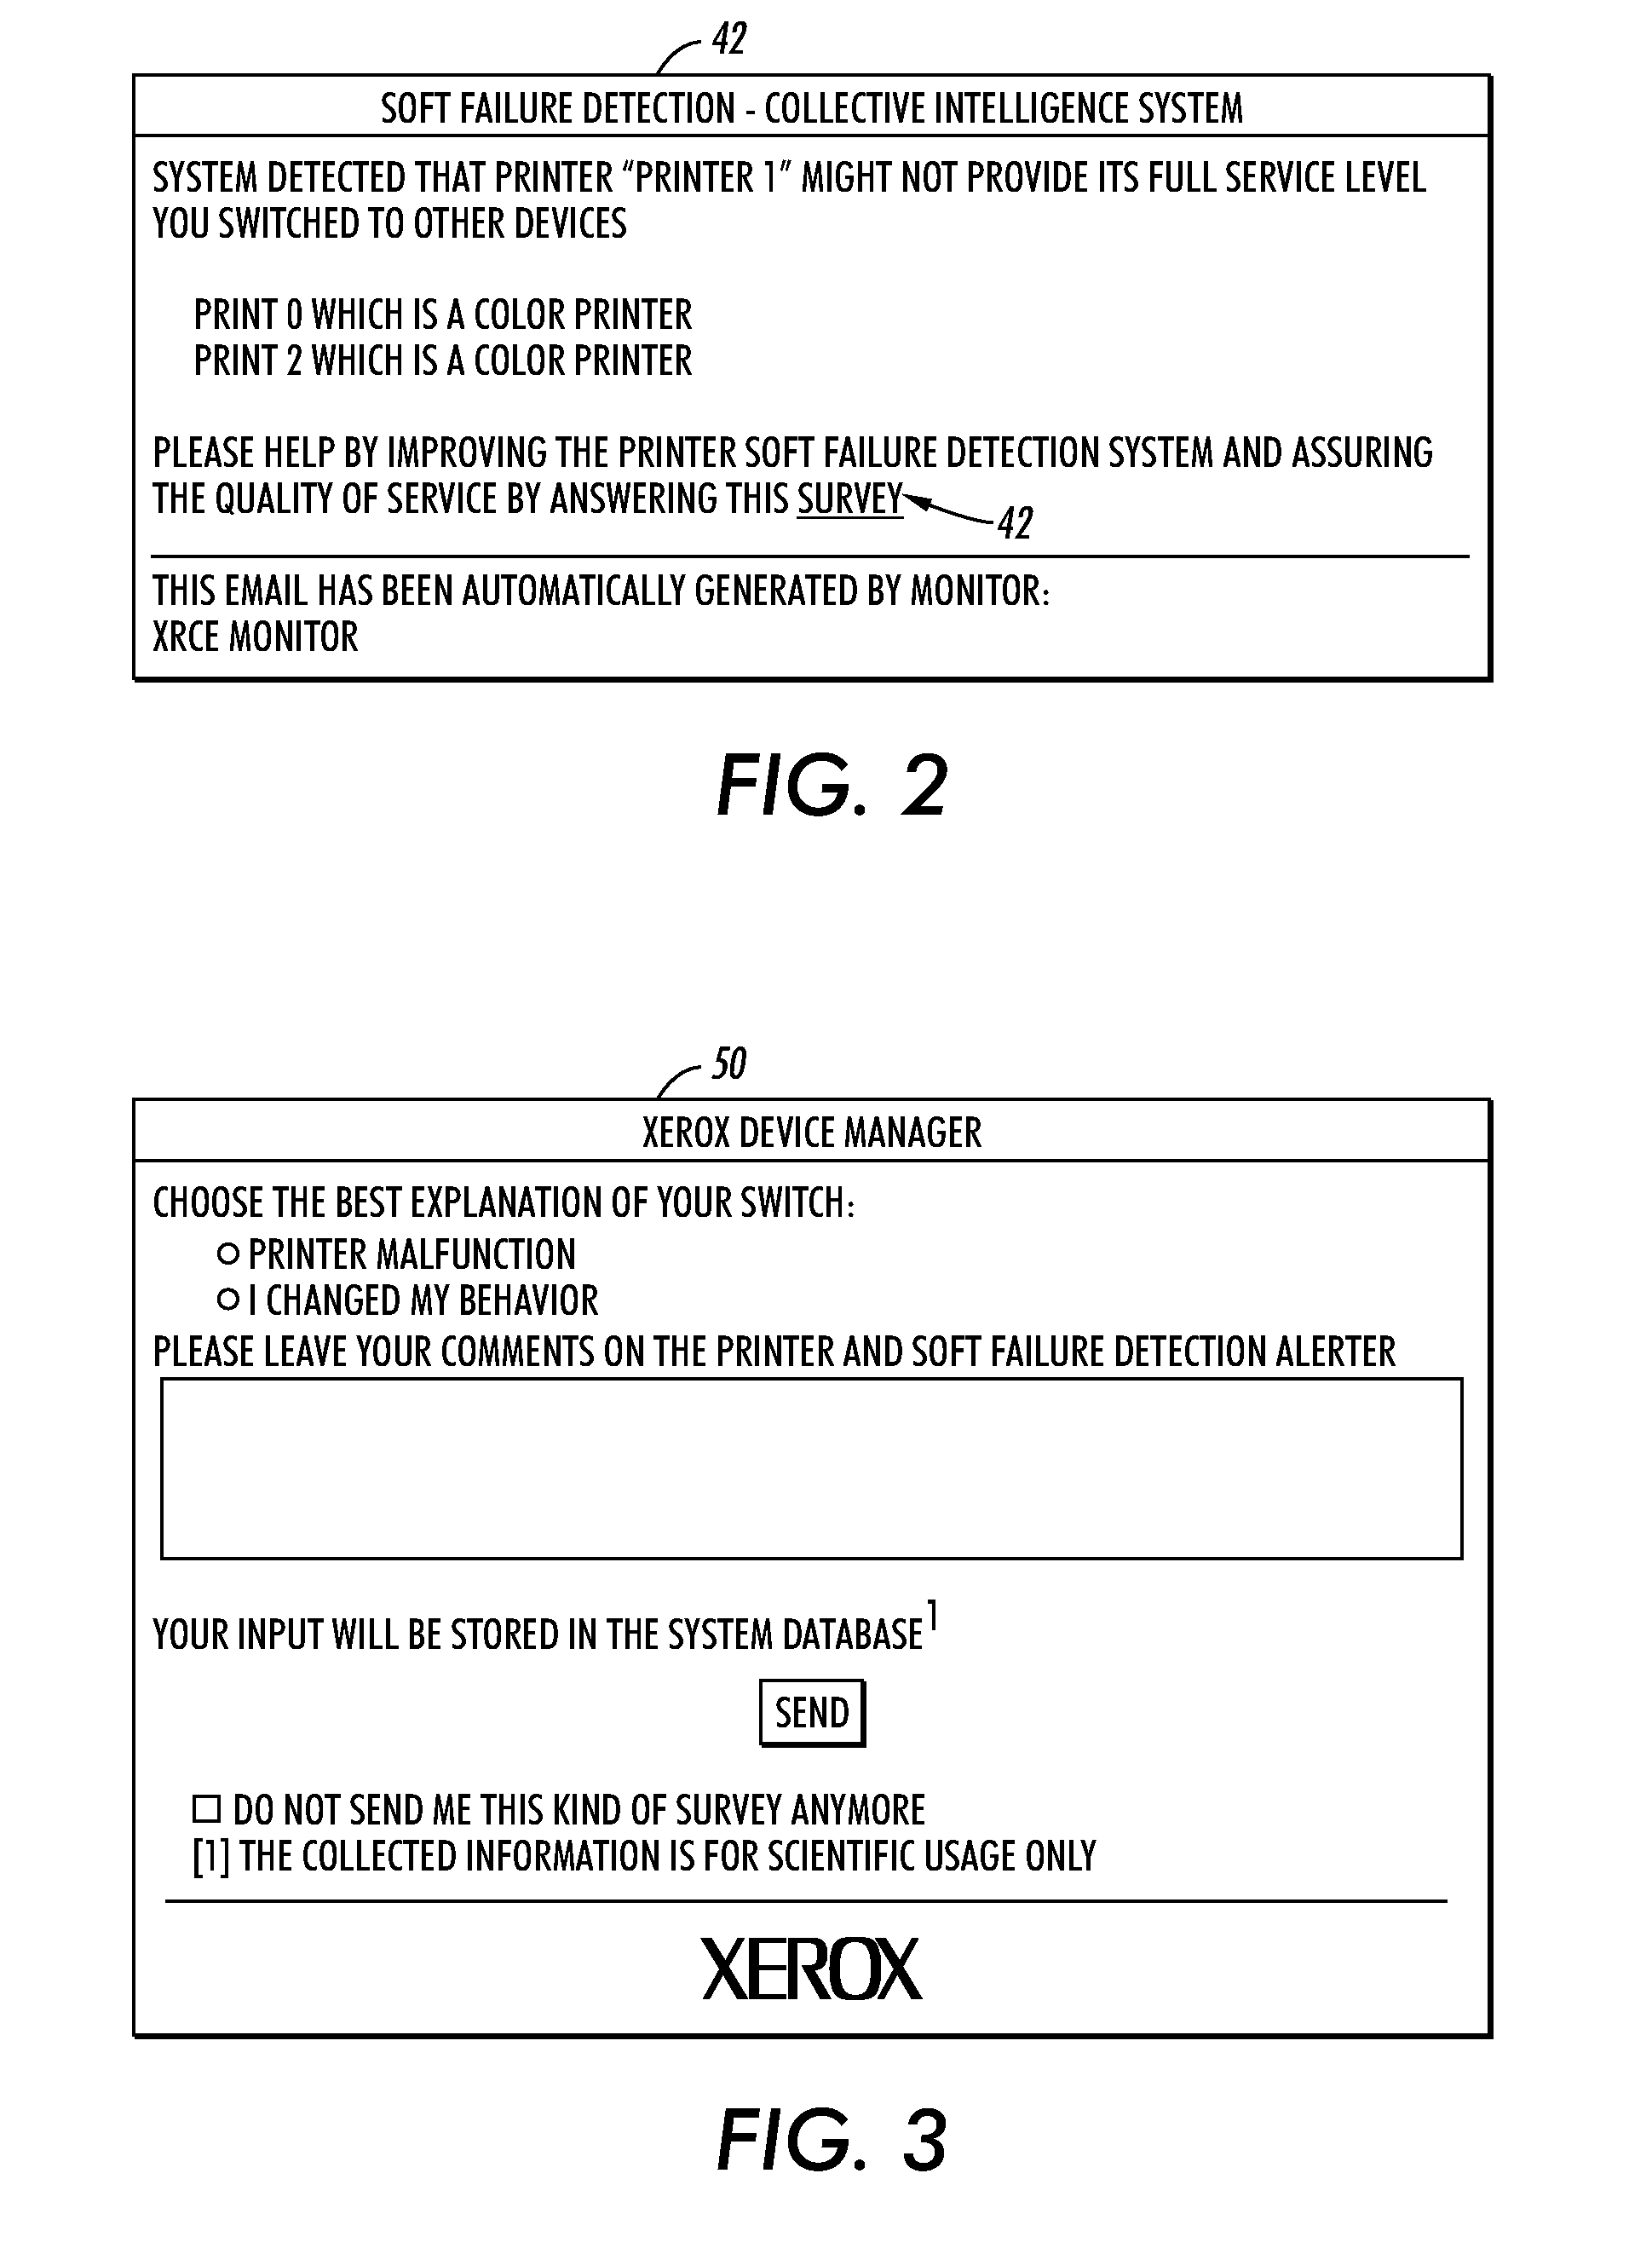 System and method for improving failure detection using collective intelligence with end-user feedback